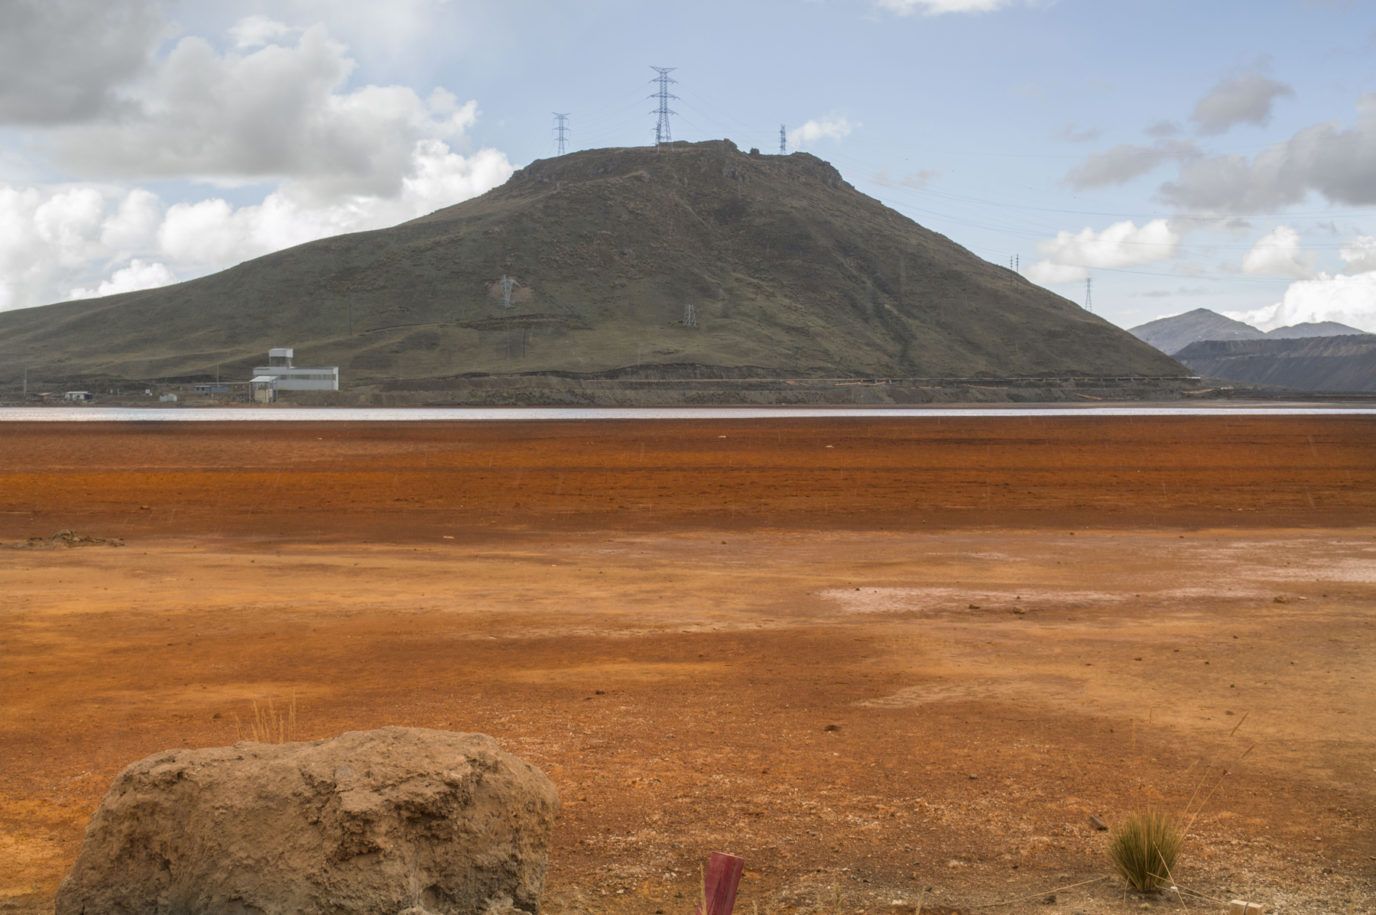 The bright orange Quiulacocha tailings dam, named for the adjacent town. Image by Ricardo Martínez. Peru, 2017.